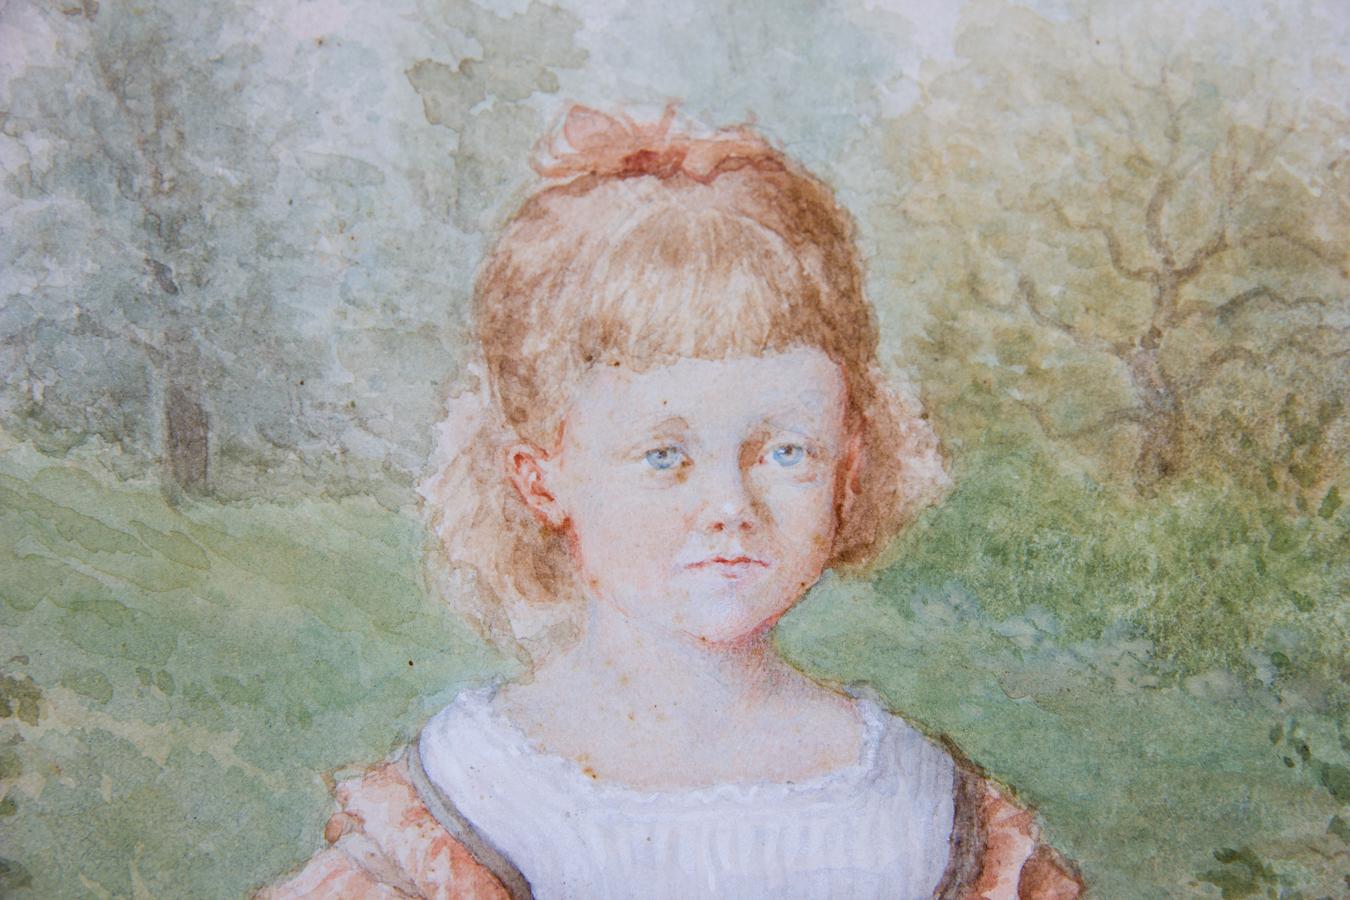 A very fine watercolour portrait of two French aristocratic children by the listed artist Paul de Katow (1834-1897), in a bucolic woodland setting. Both children are dressed in the late 19th Century French fashion, with the girl clutching her hat.